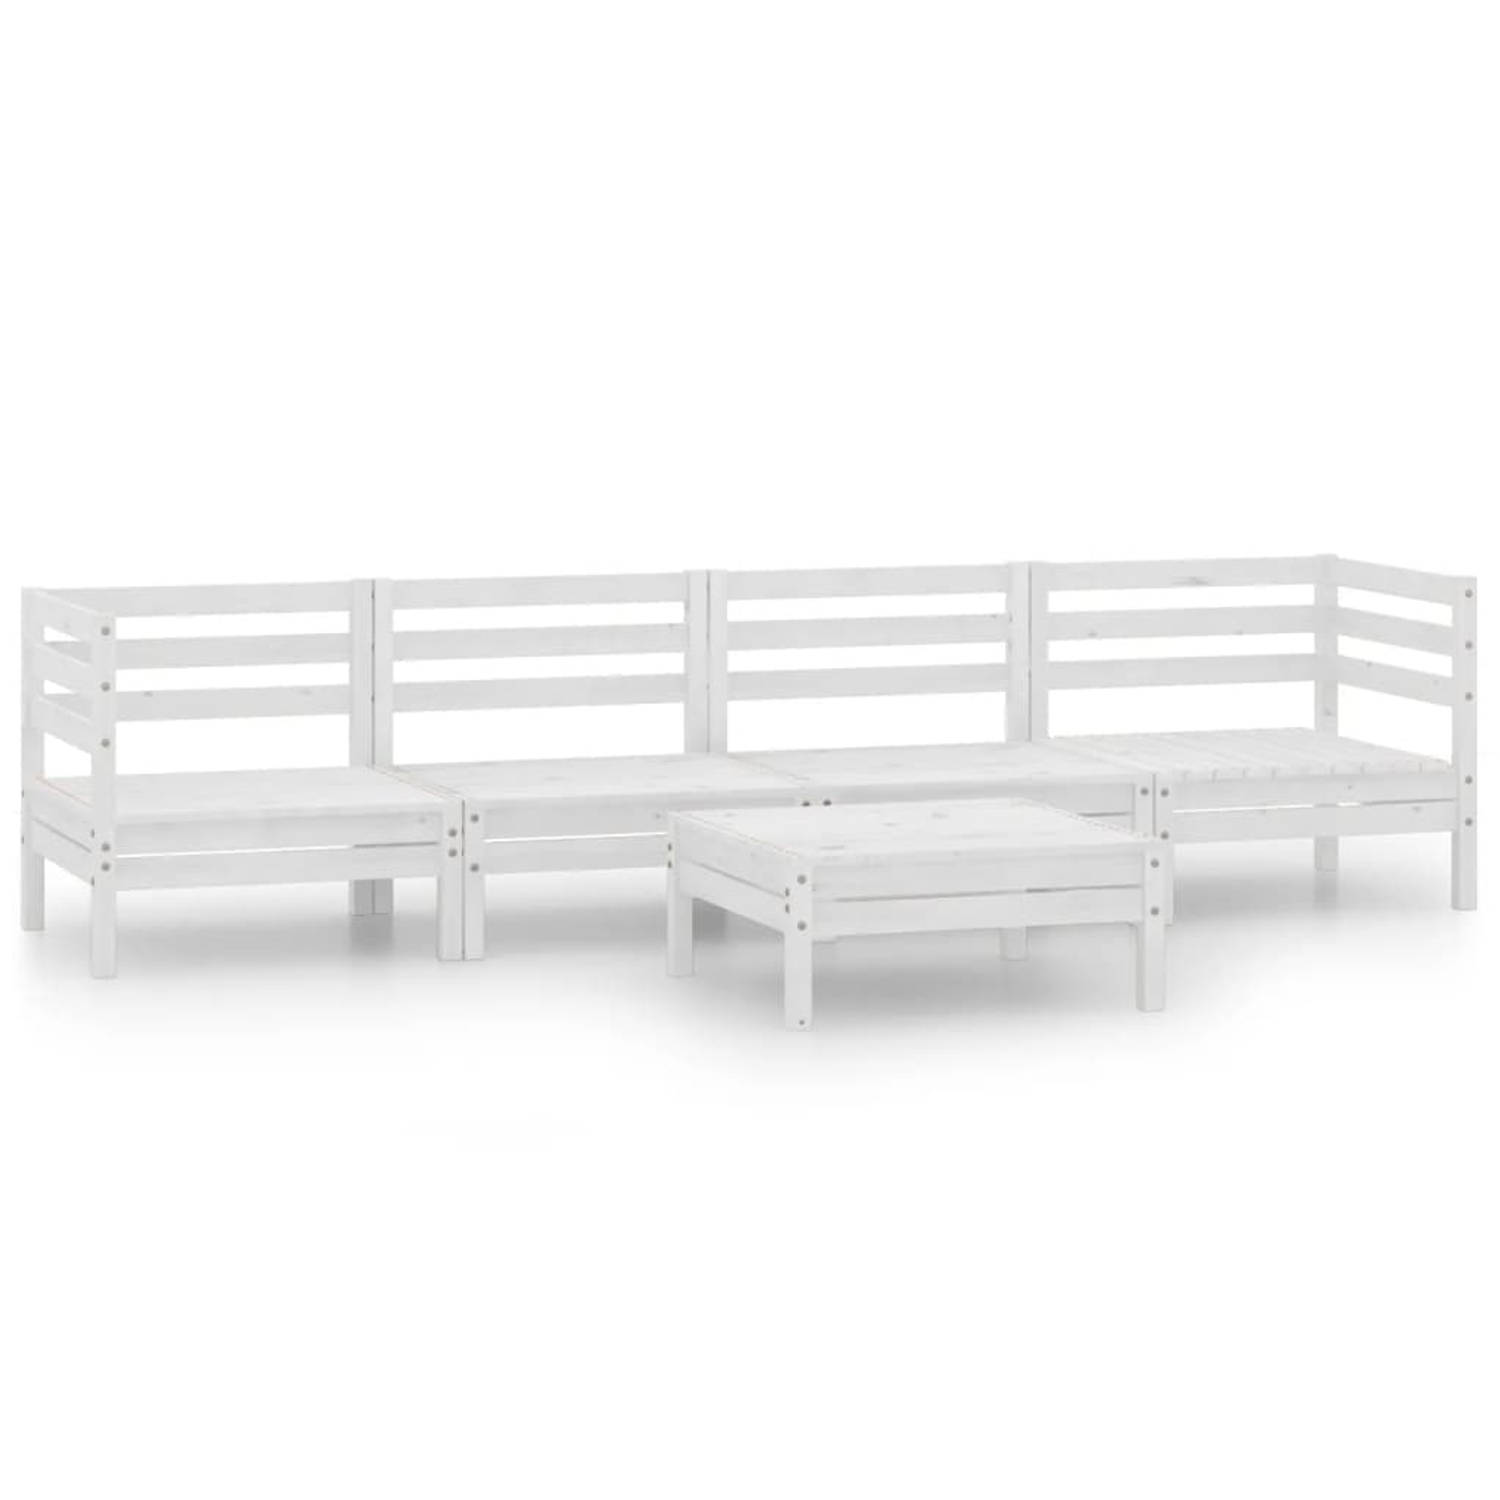 The Living Store Loungeset - Grenenhout - Wit - 4-delig - 63.5 x 63.5 x 62.5 cm